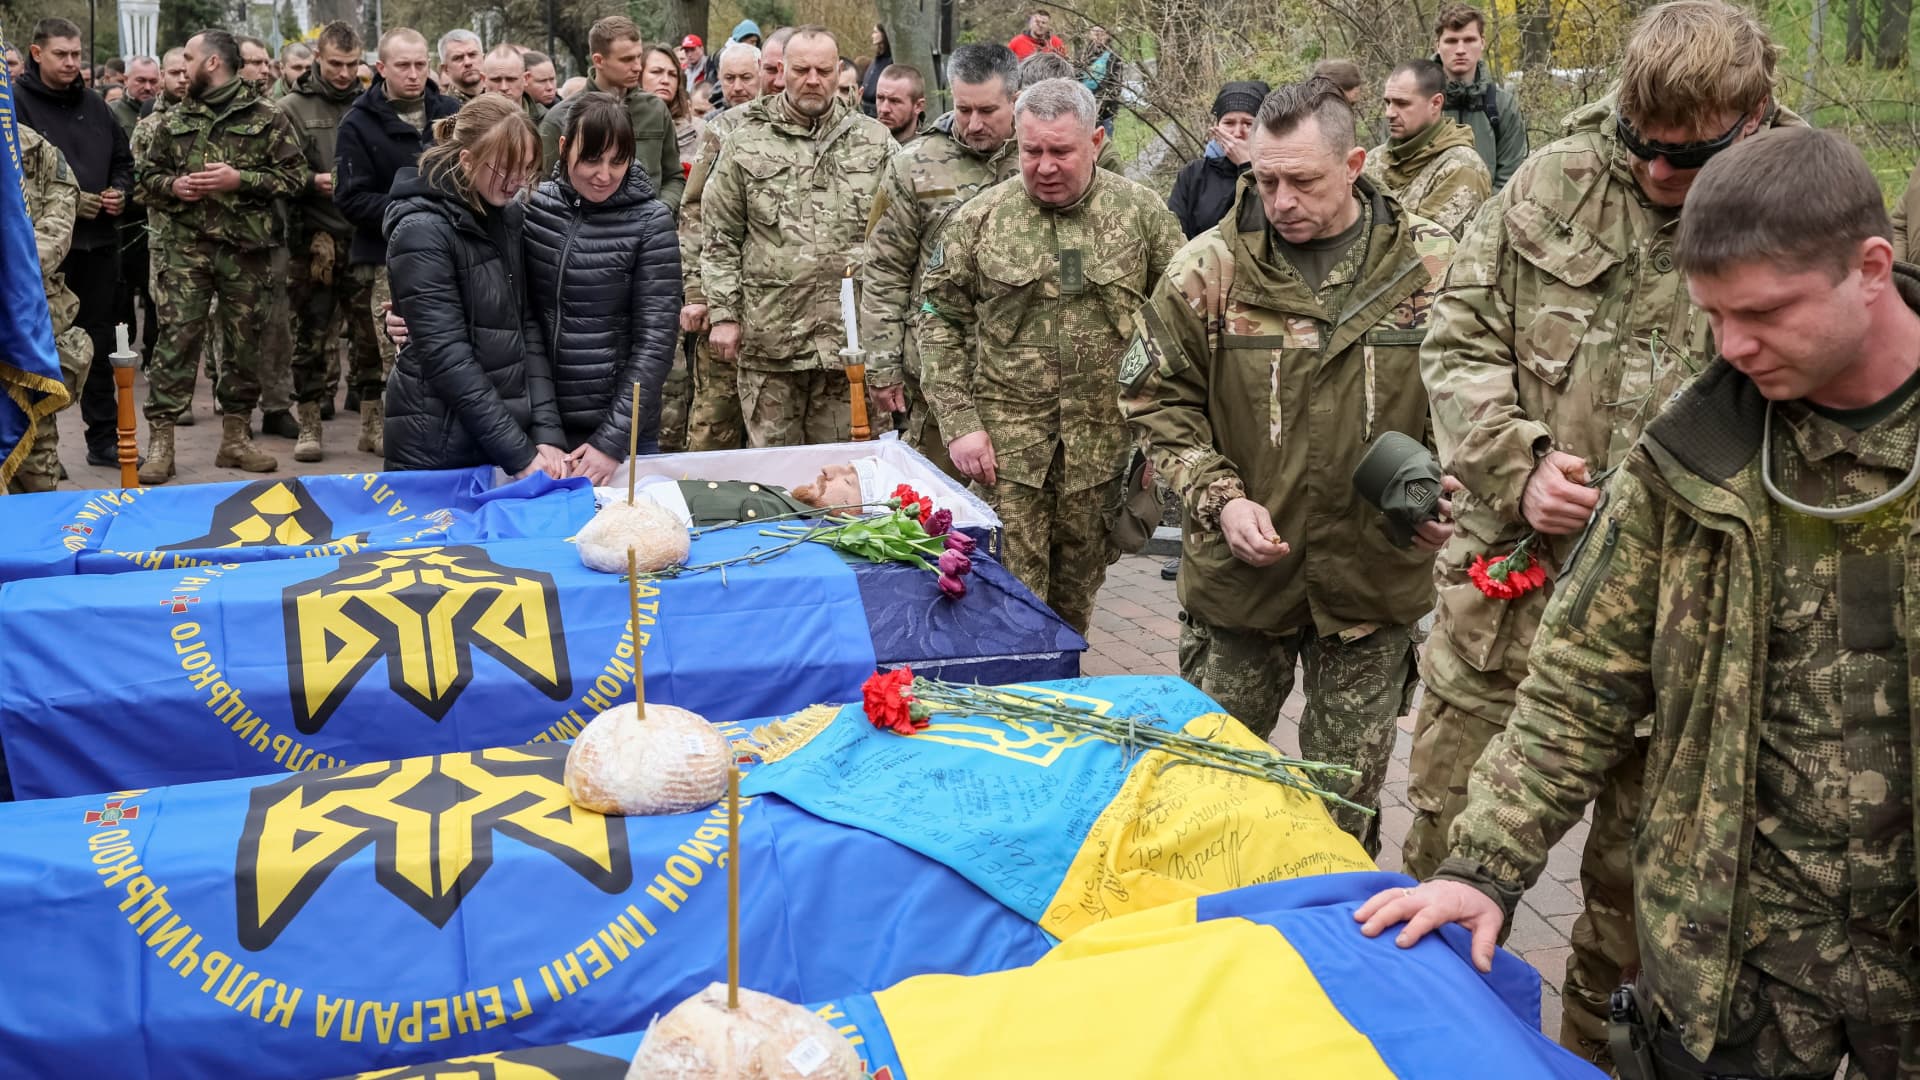 Servicemen of the Ukrainian National Guard attend the funeral of the four of their fellow servicemen, who were killed during Russia's invasion of Ukraine, in Kyiv, Ukraine, April 20, 2022.